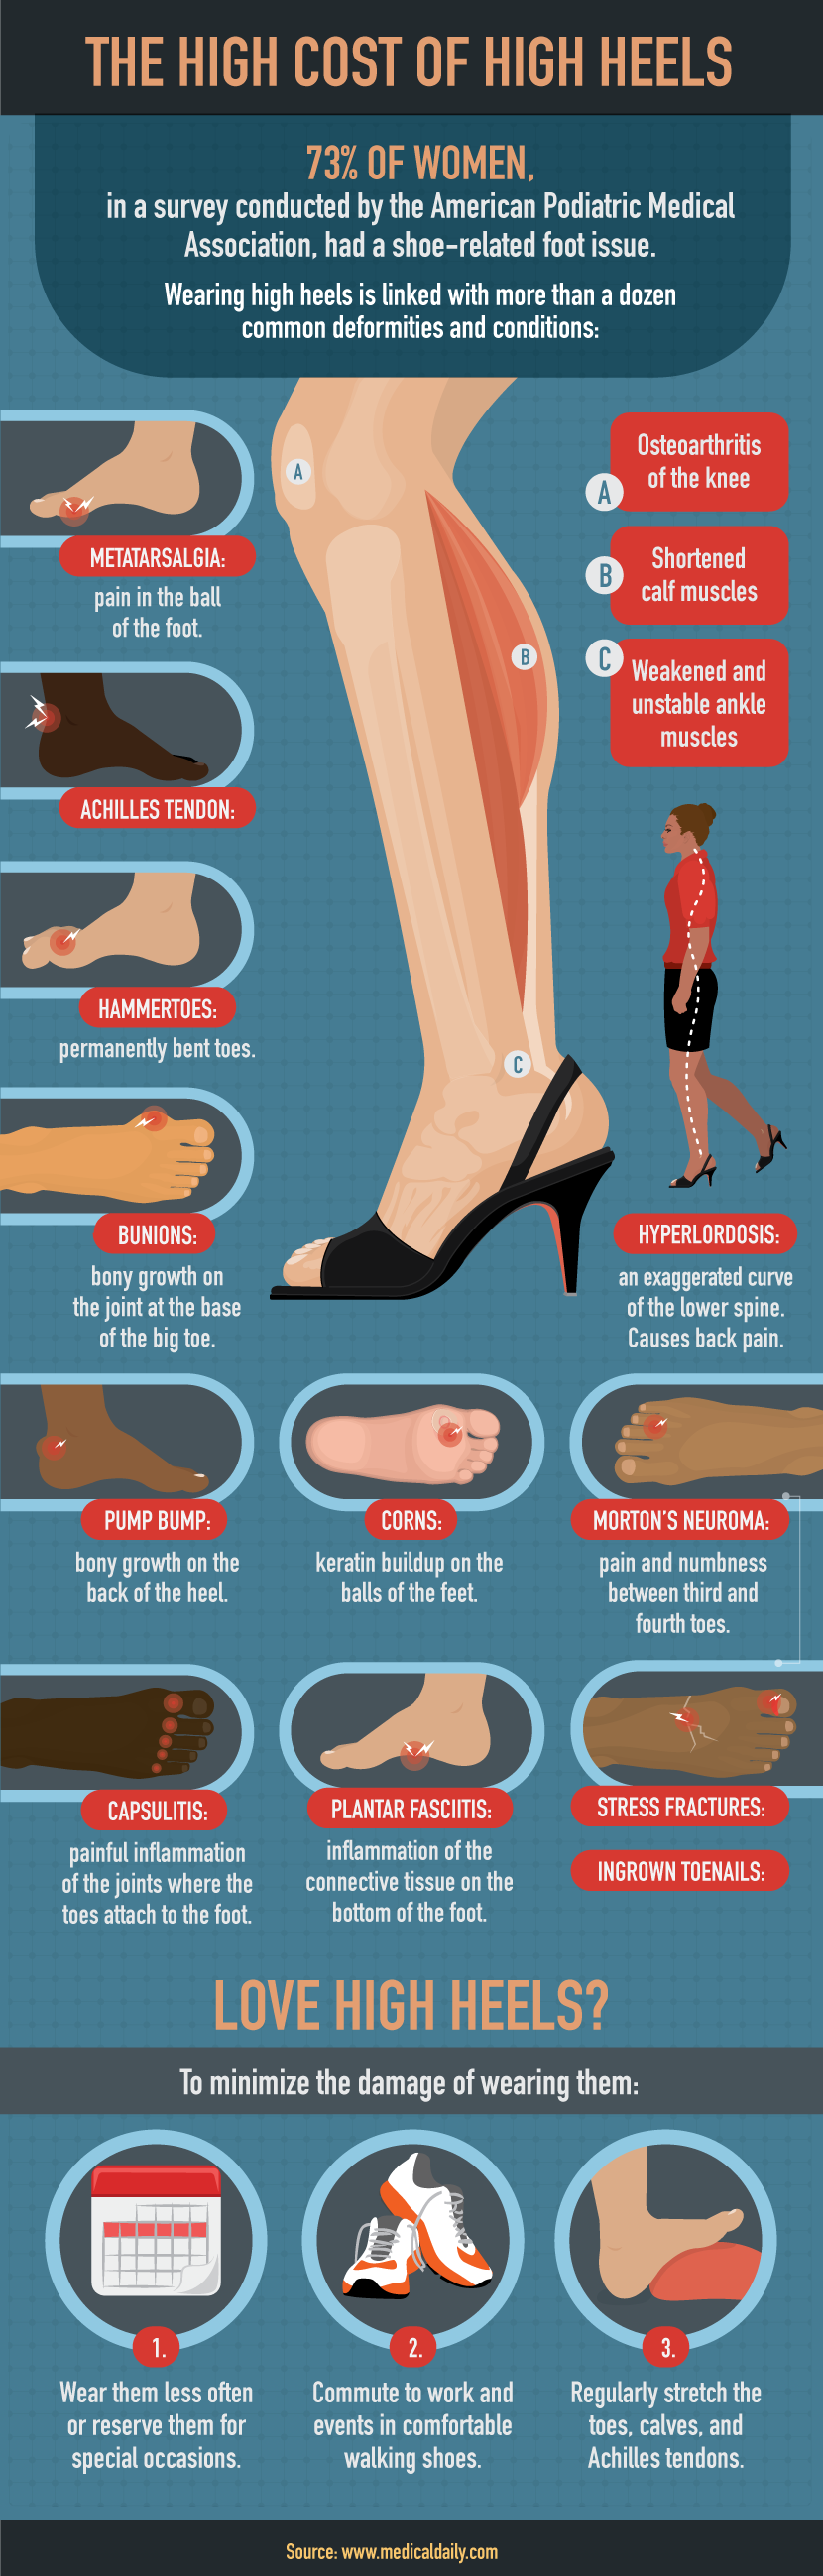 Cost of High Heels - How to Treat Your Feet